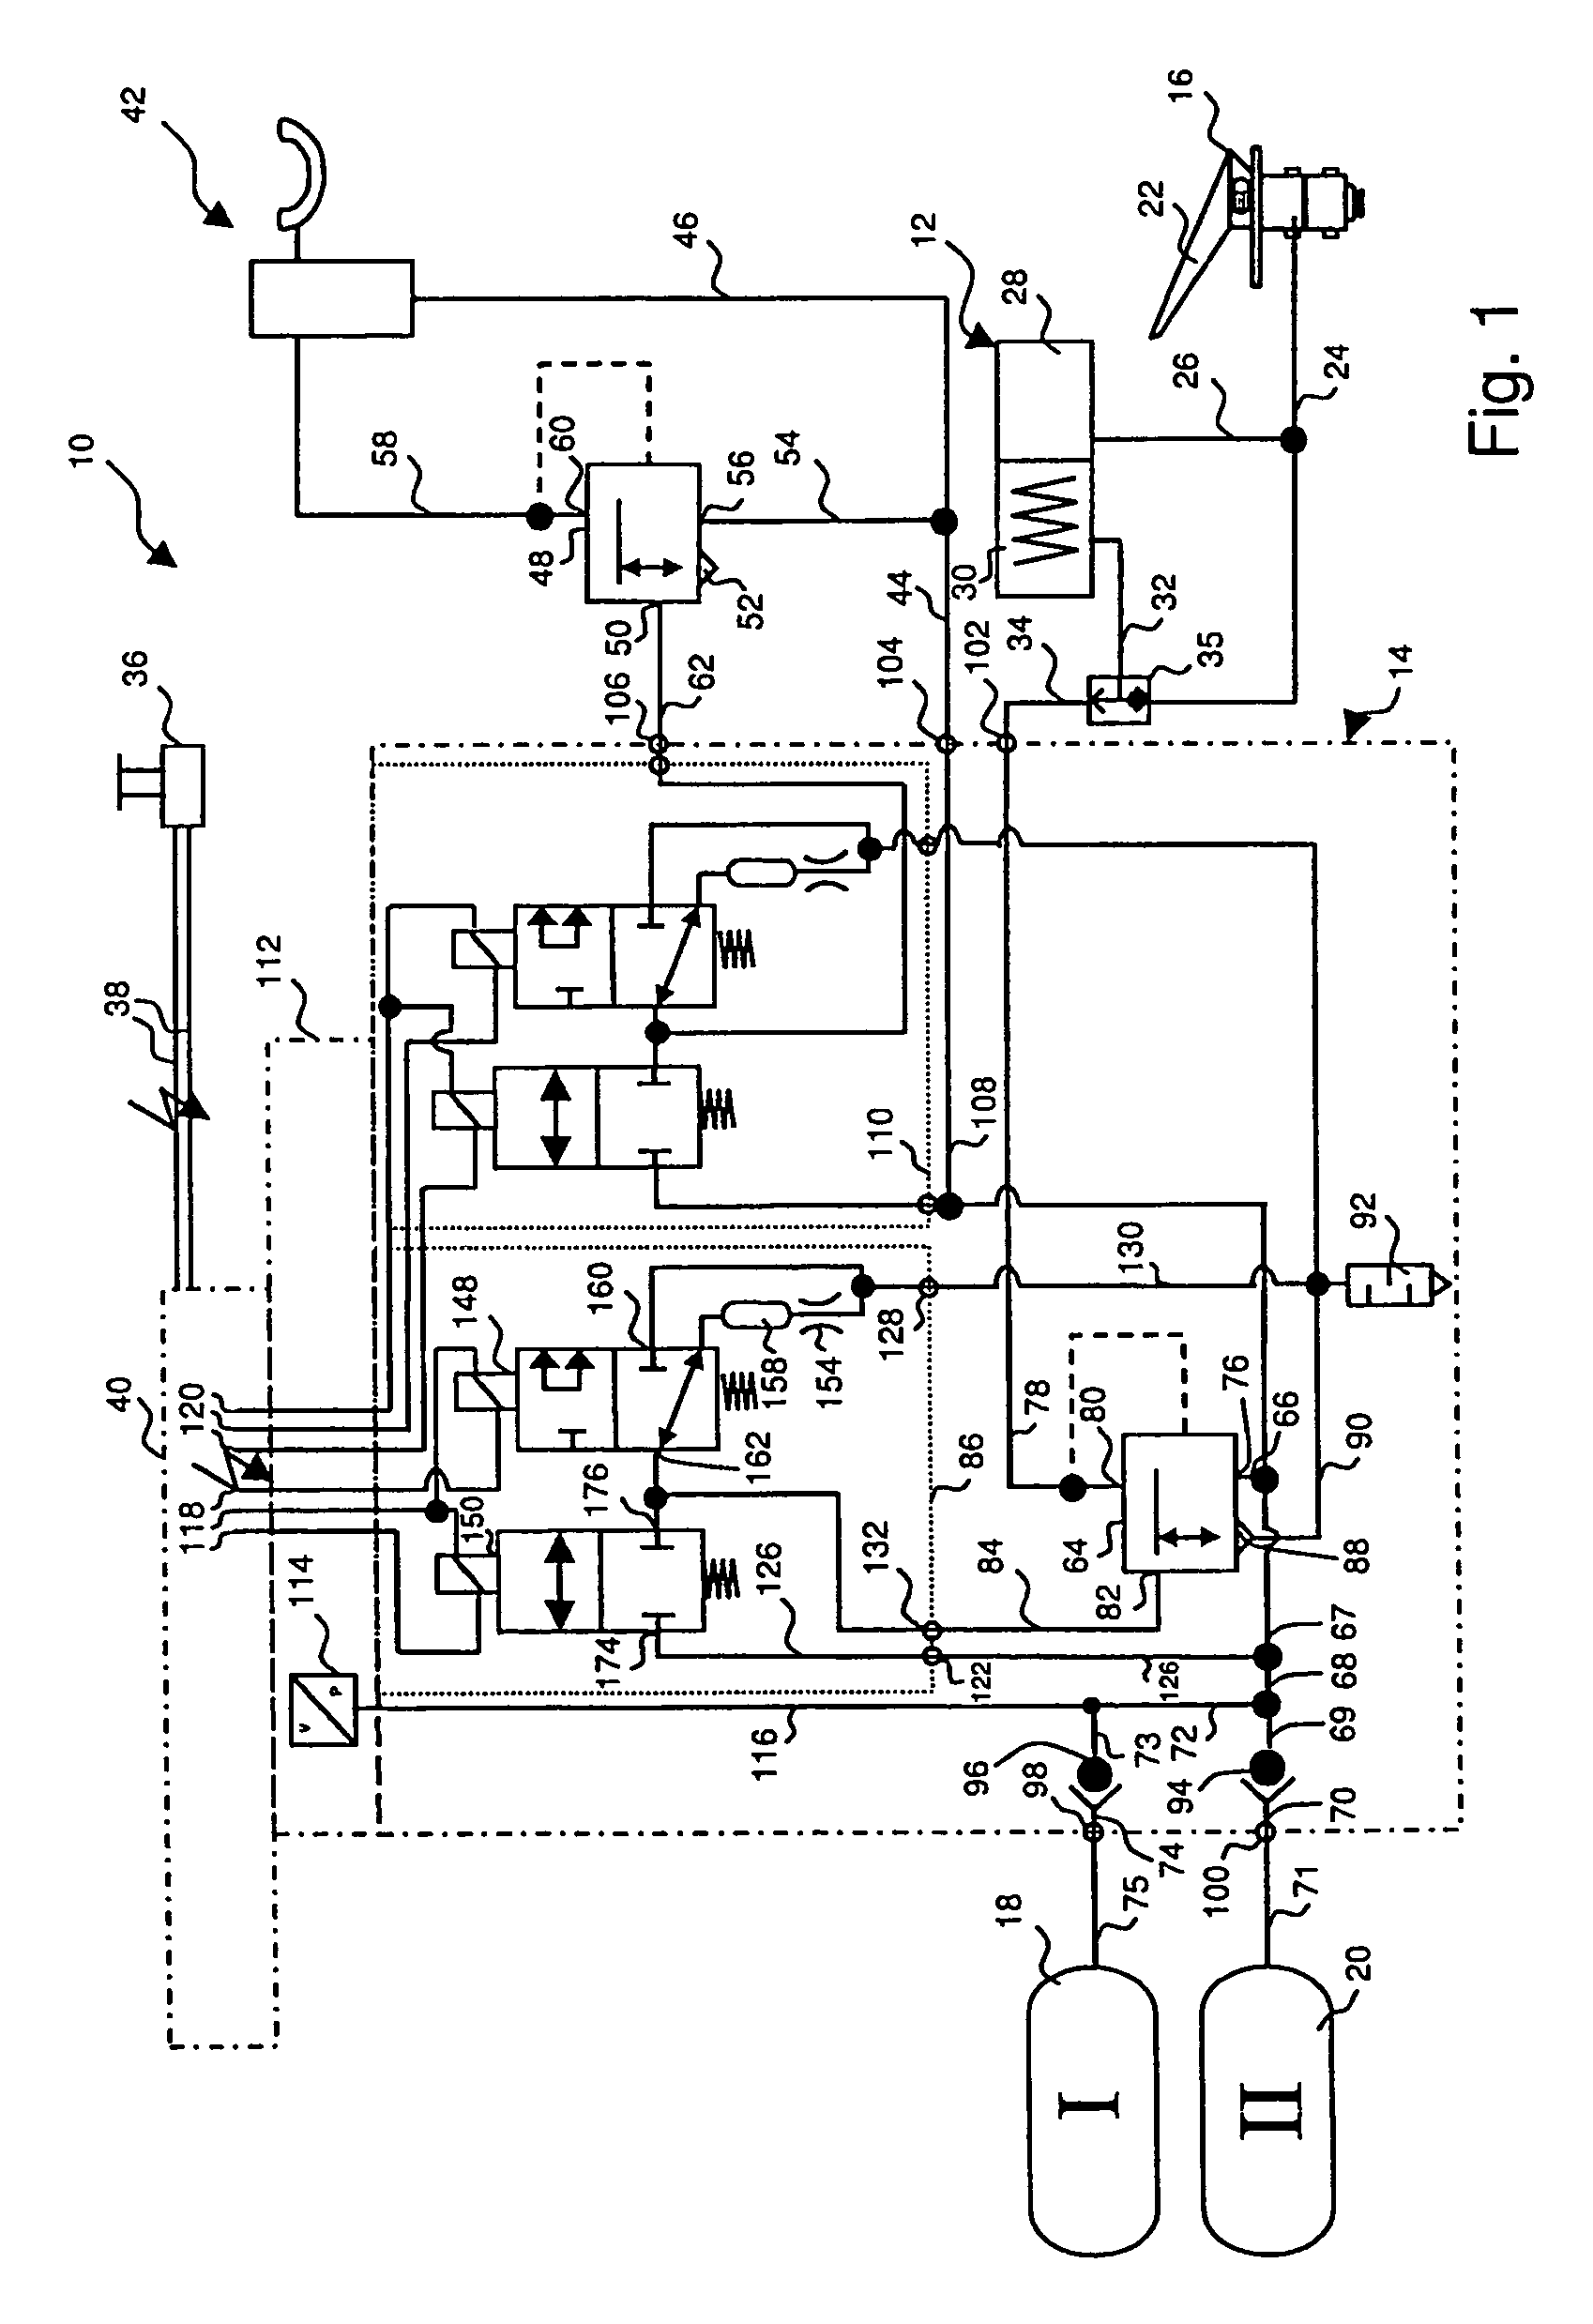 Valve unit for an electro-pneumatic brake control device for controlling a parking brake